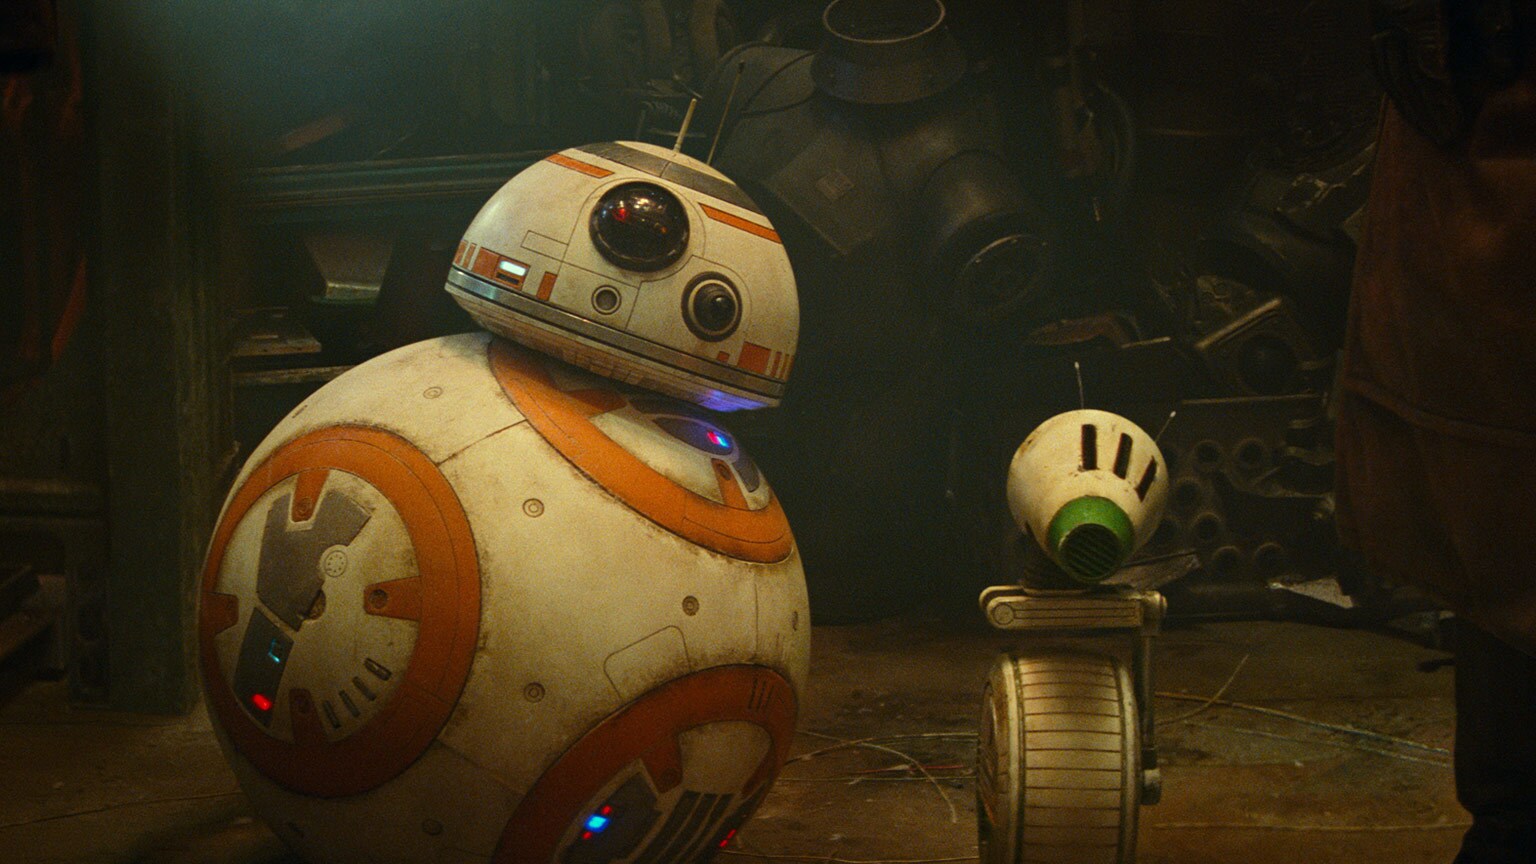 20 of the Star Wars Galaxy's Greatest Droids